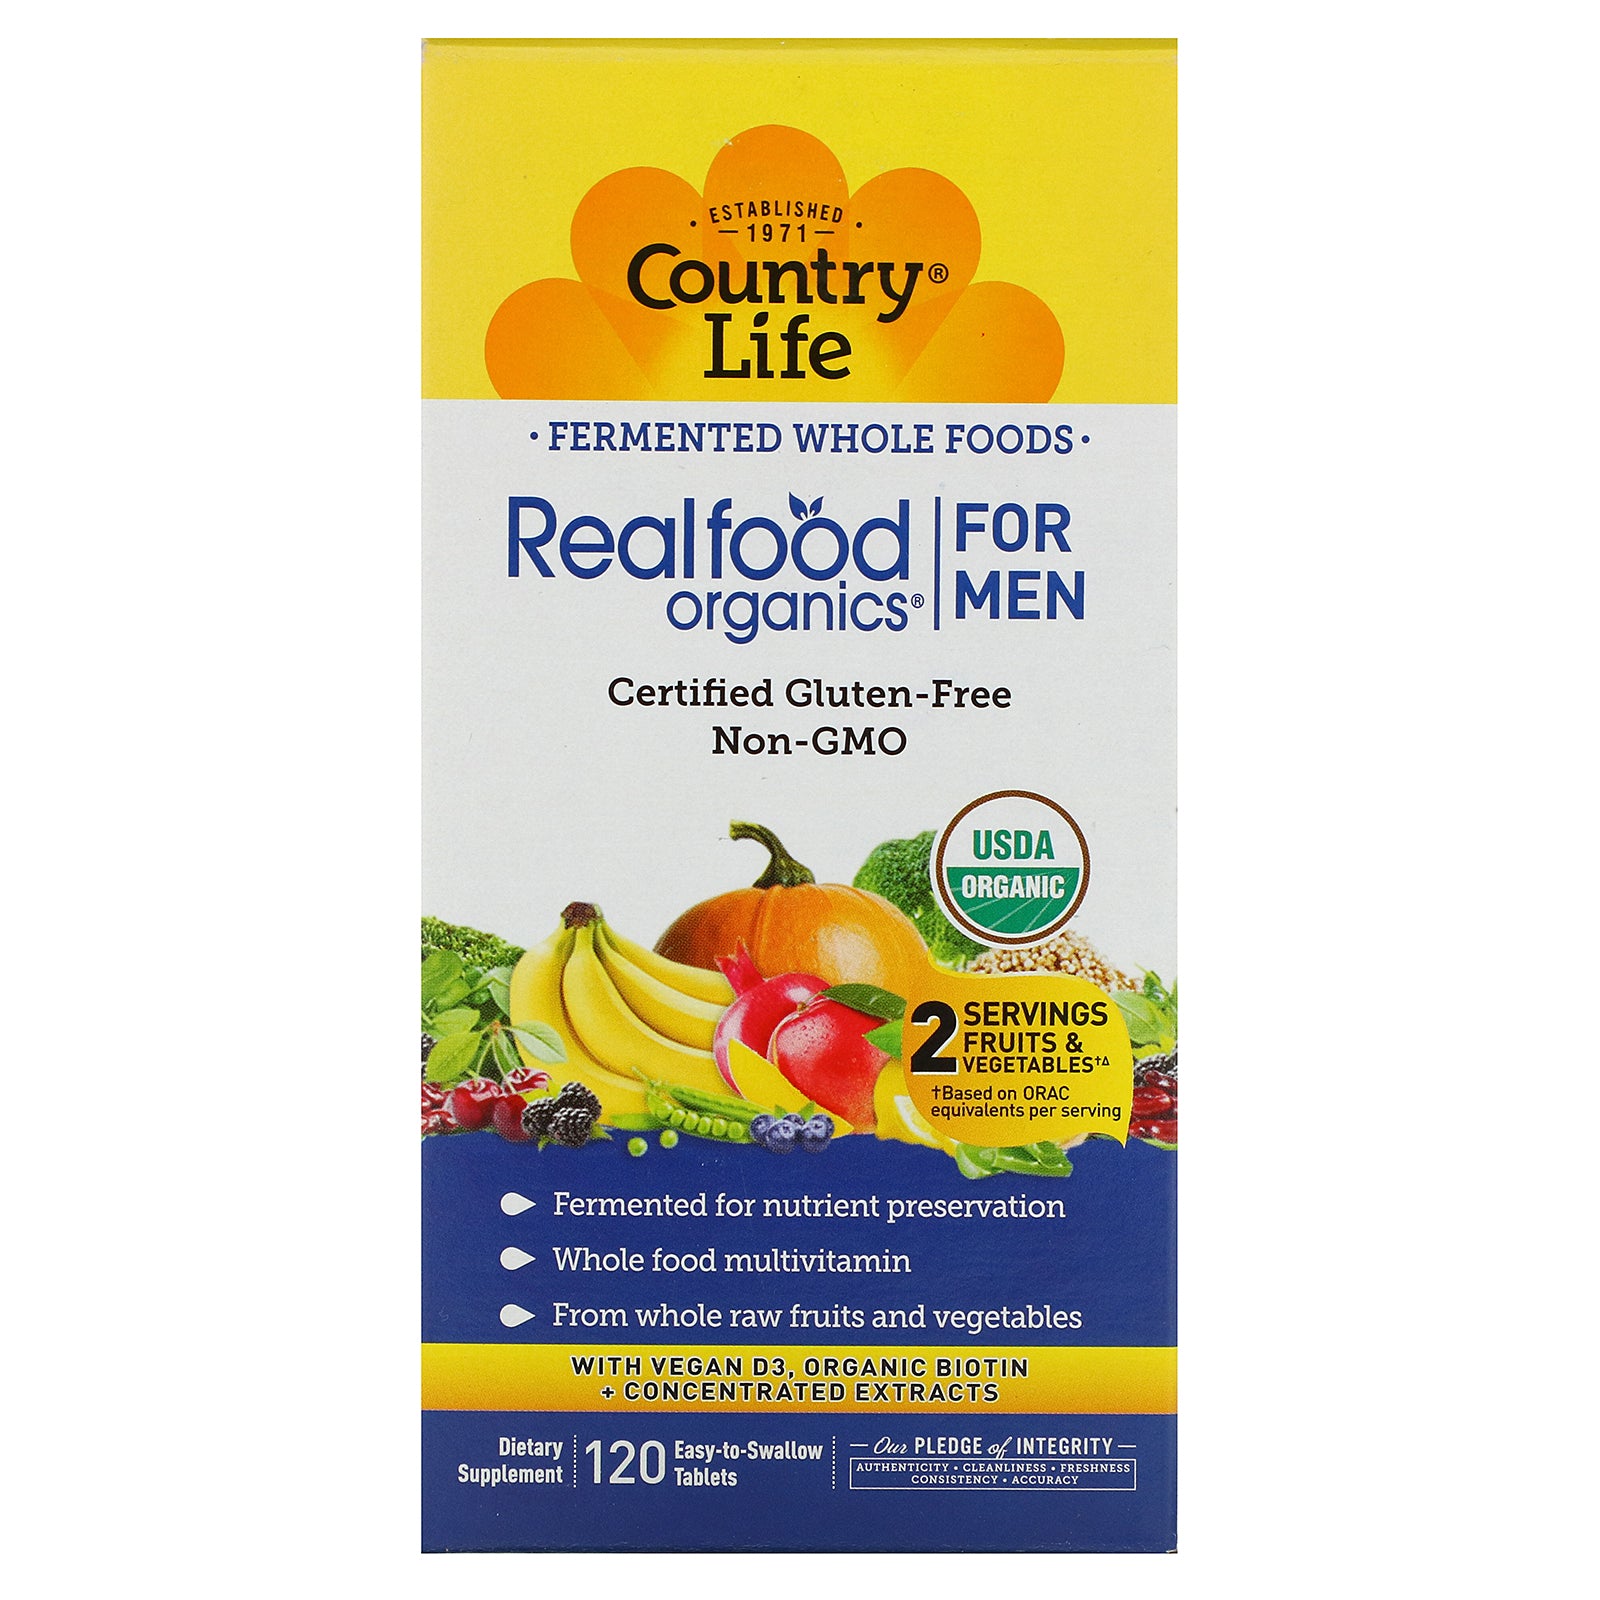 Country Life, Realfood Organics, Men's Daily Nutrition, 120 Easy-to-Swallow Tablets